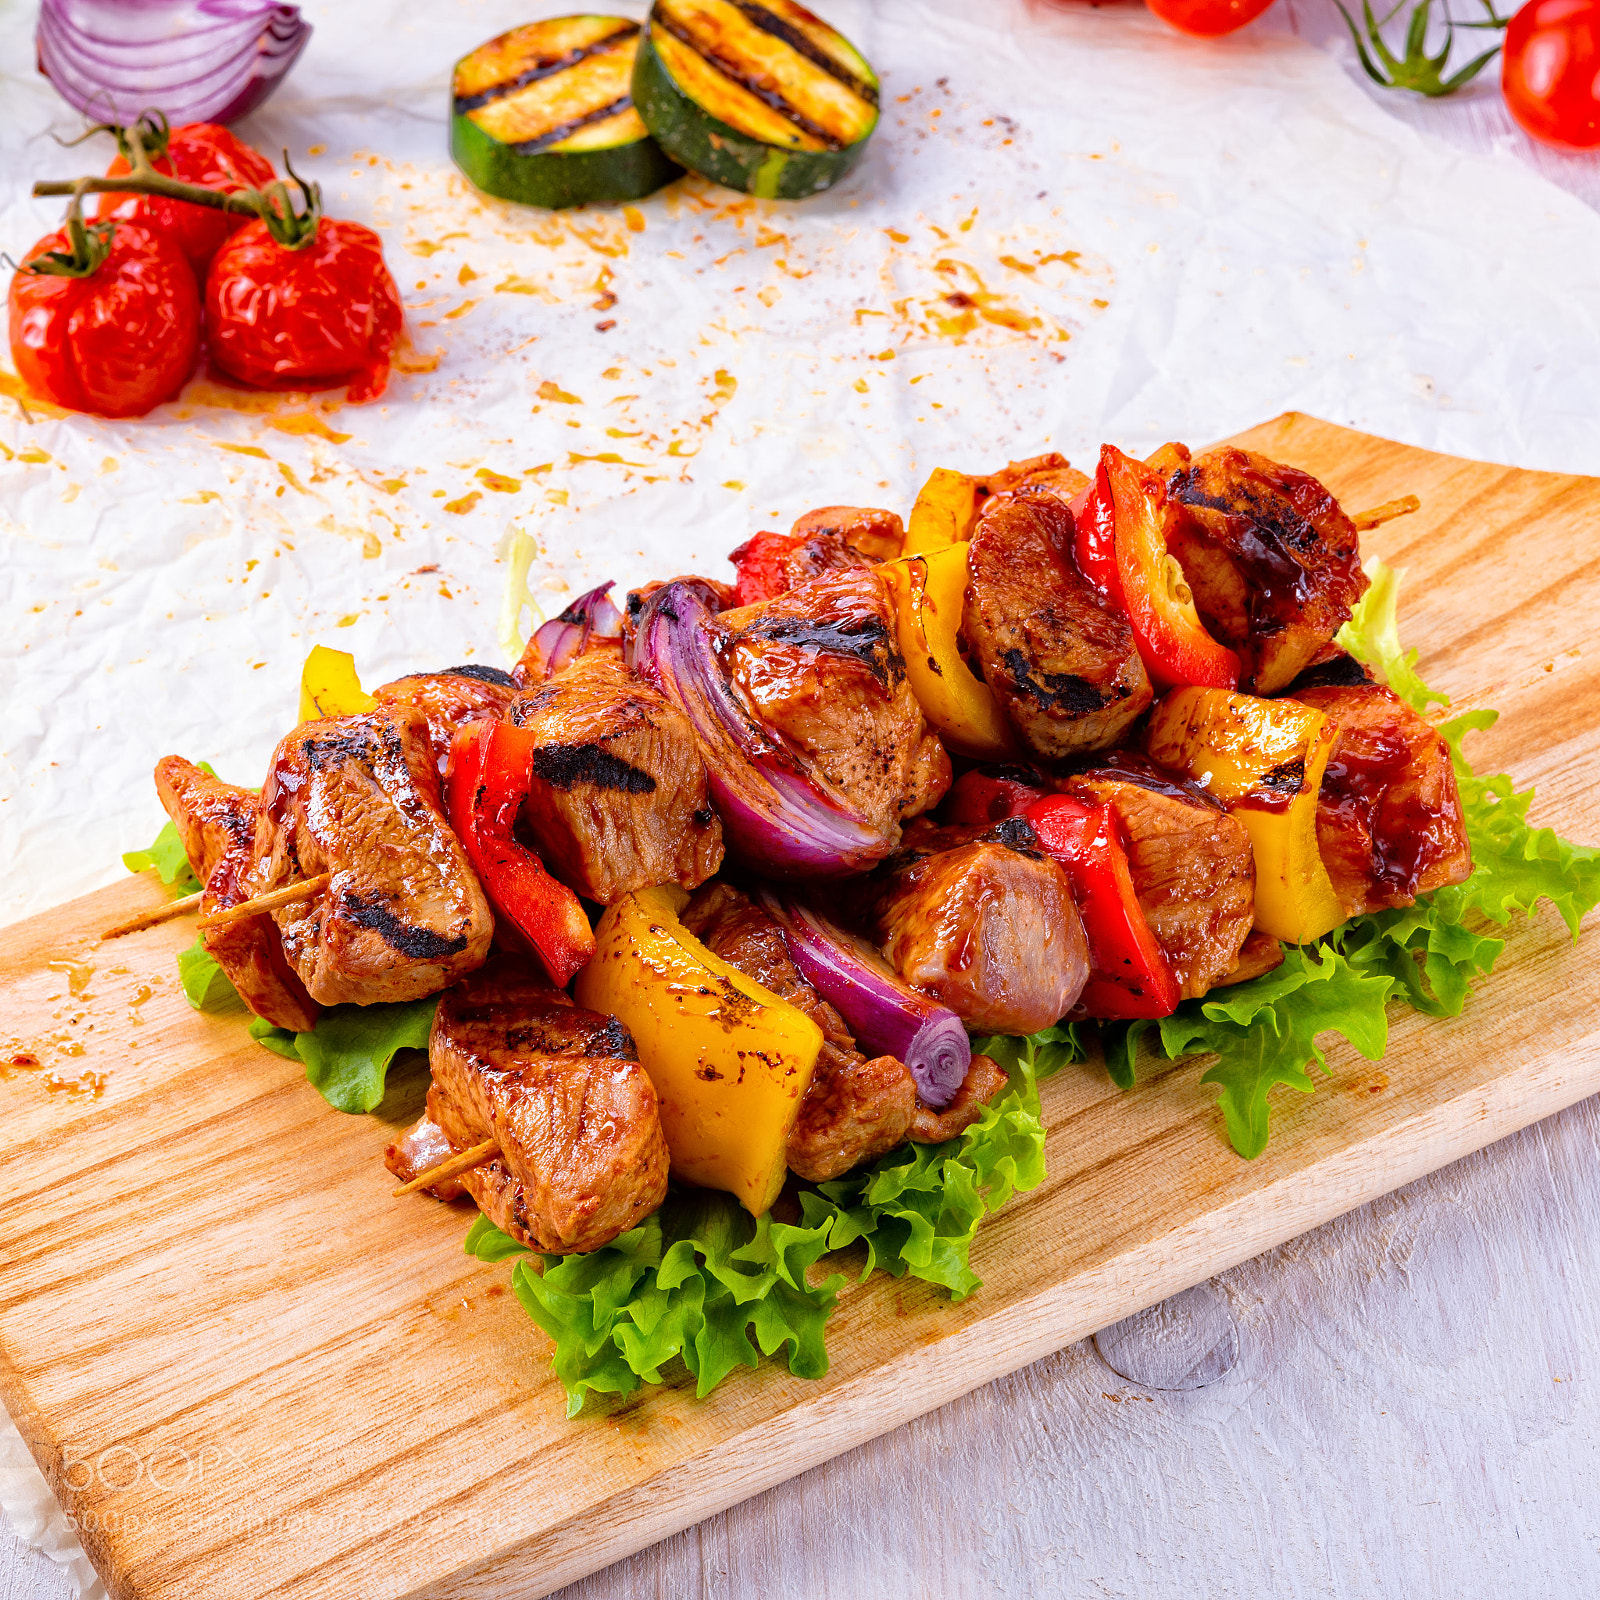 Nikon D810 sample photo. Tasty and colorful meat photography